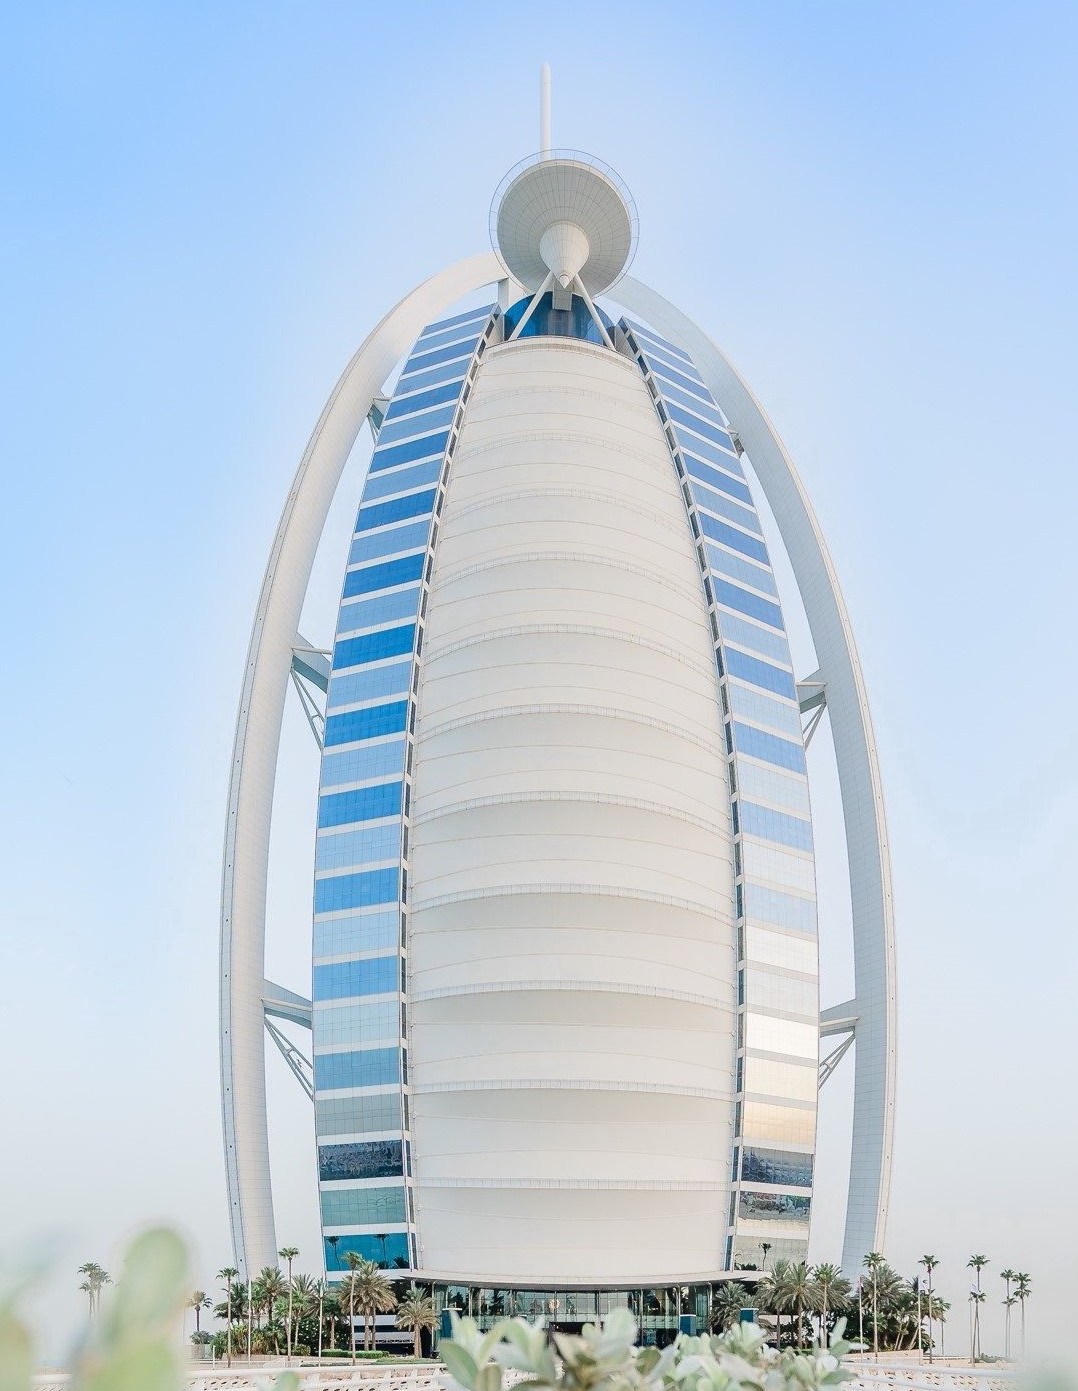 One of the world's most iconic hotels, the Burj Al Arab in Dubai. Click to enlarge.